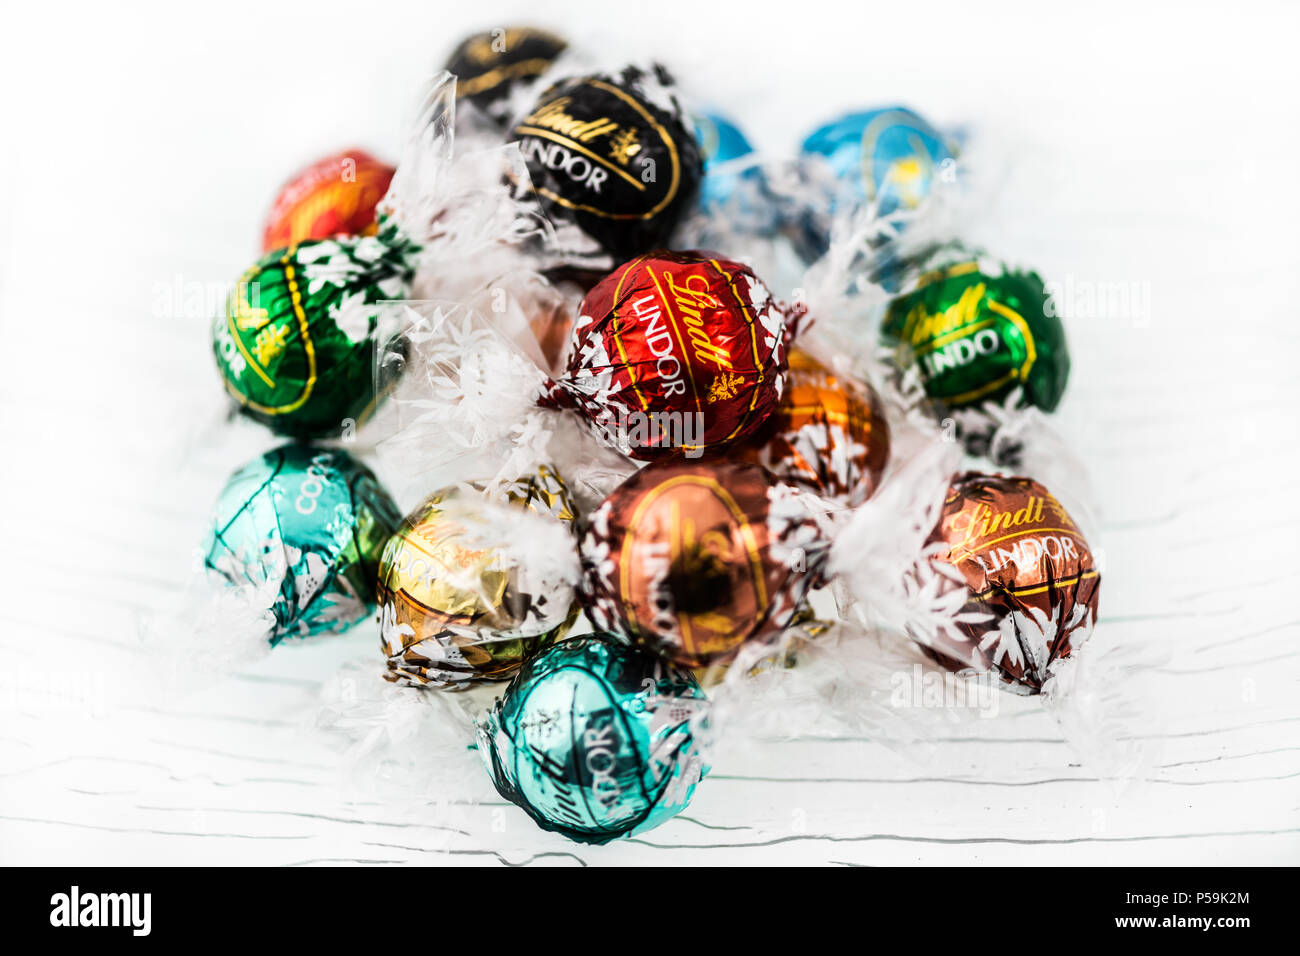 https://c8.alamy.com/comp/P59K2M/product-photography-of-chocolate-bonbons-of-the-lindt-brand-P59K2M.jpg